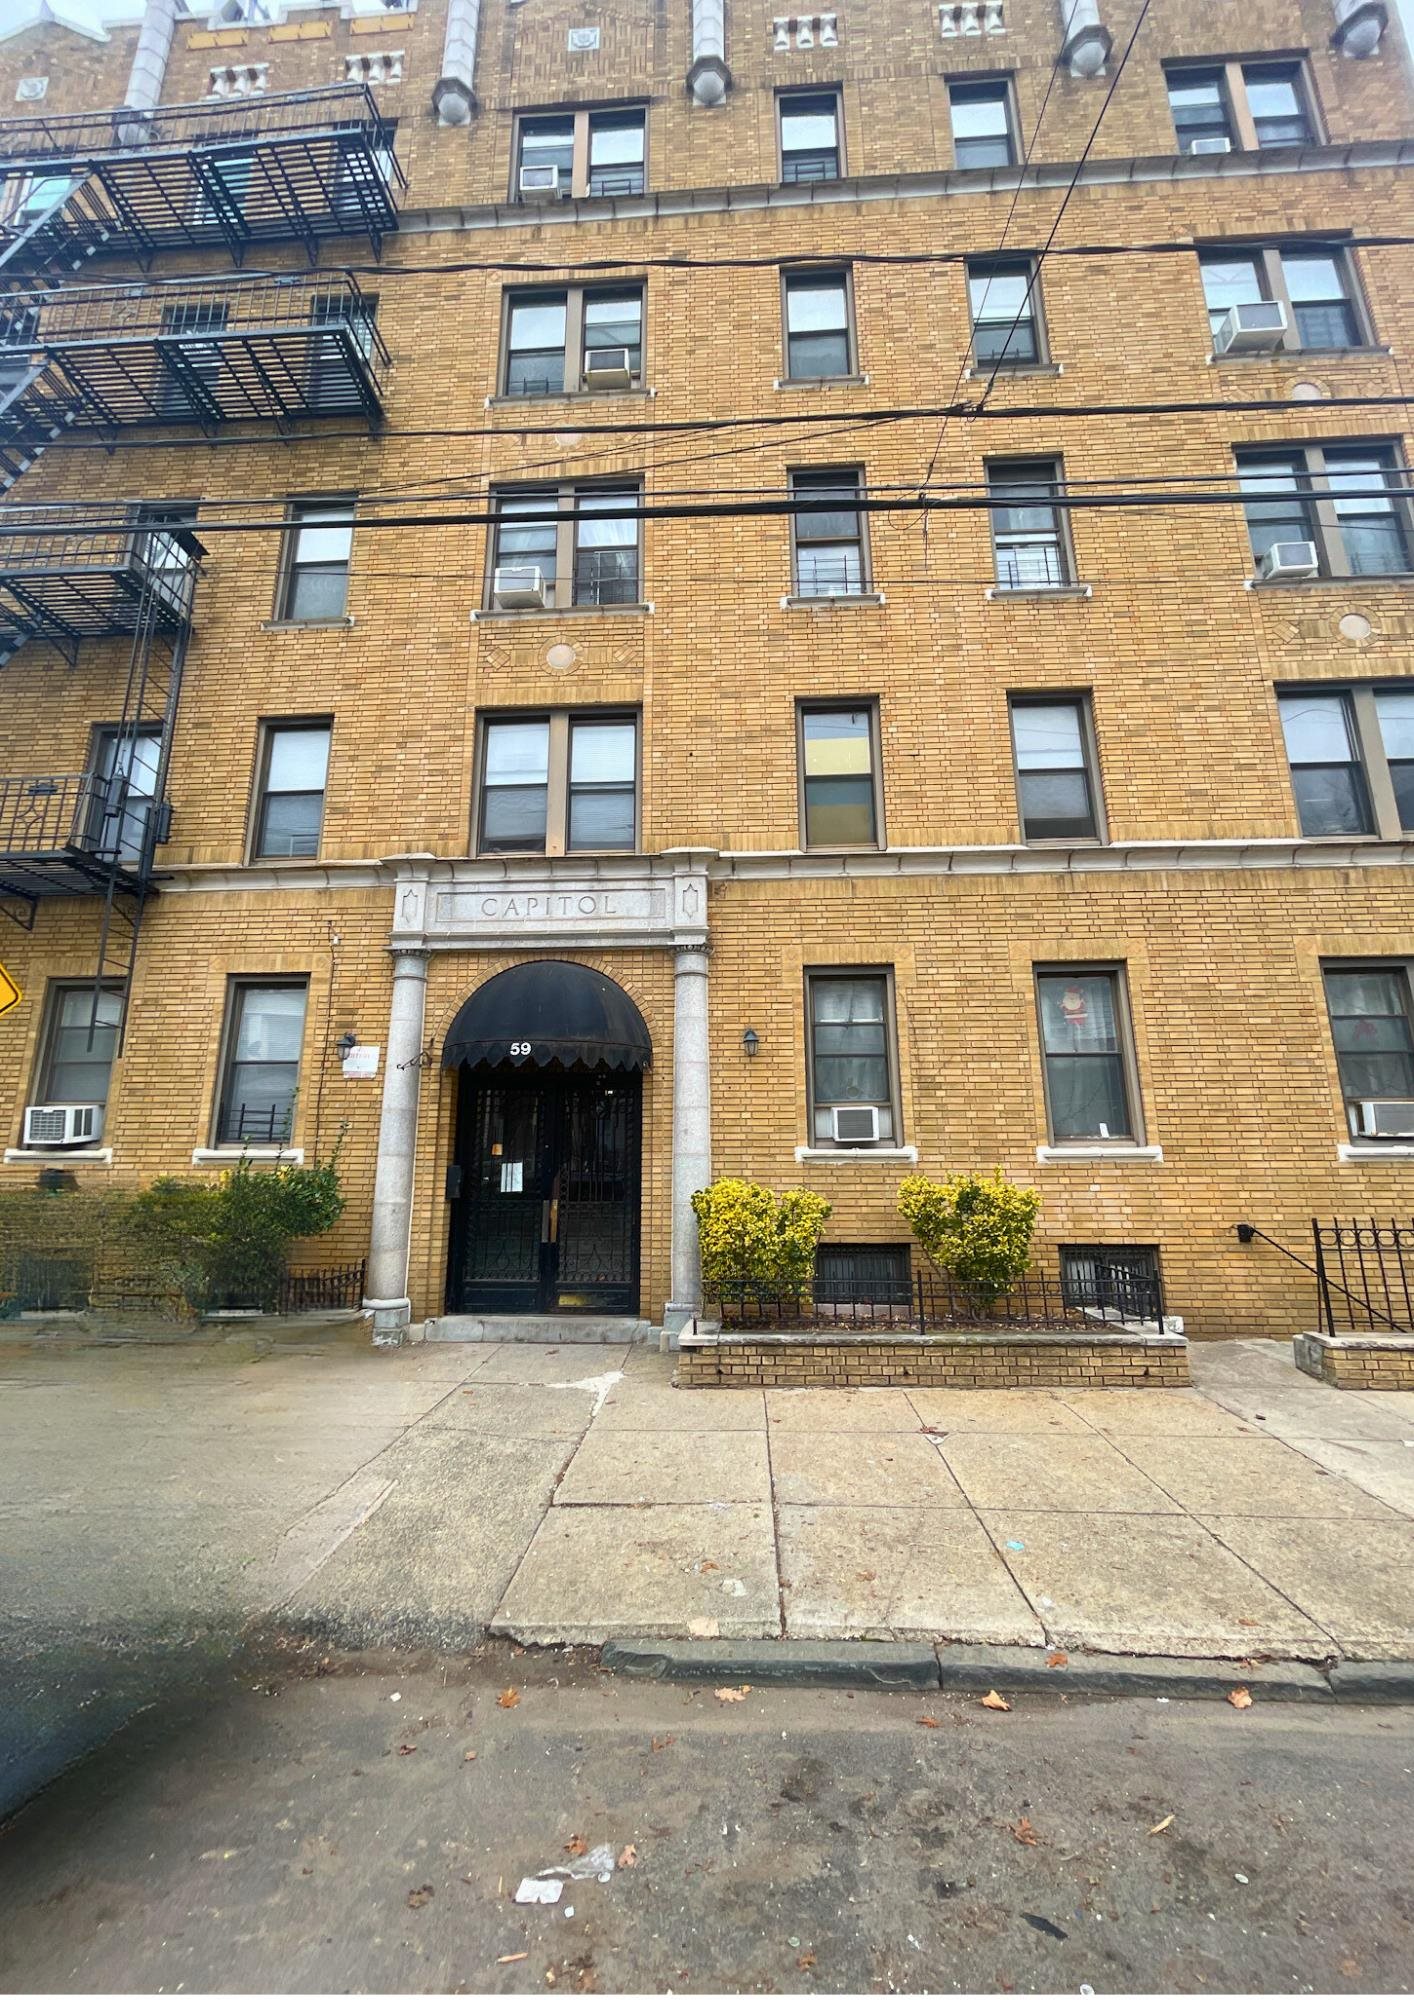 # 240001823 - For Rent in JERSEY CITY - Journal Square NJ